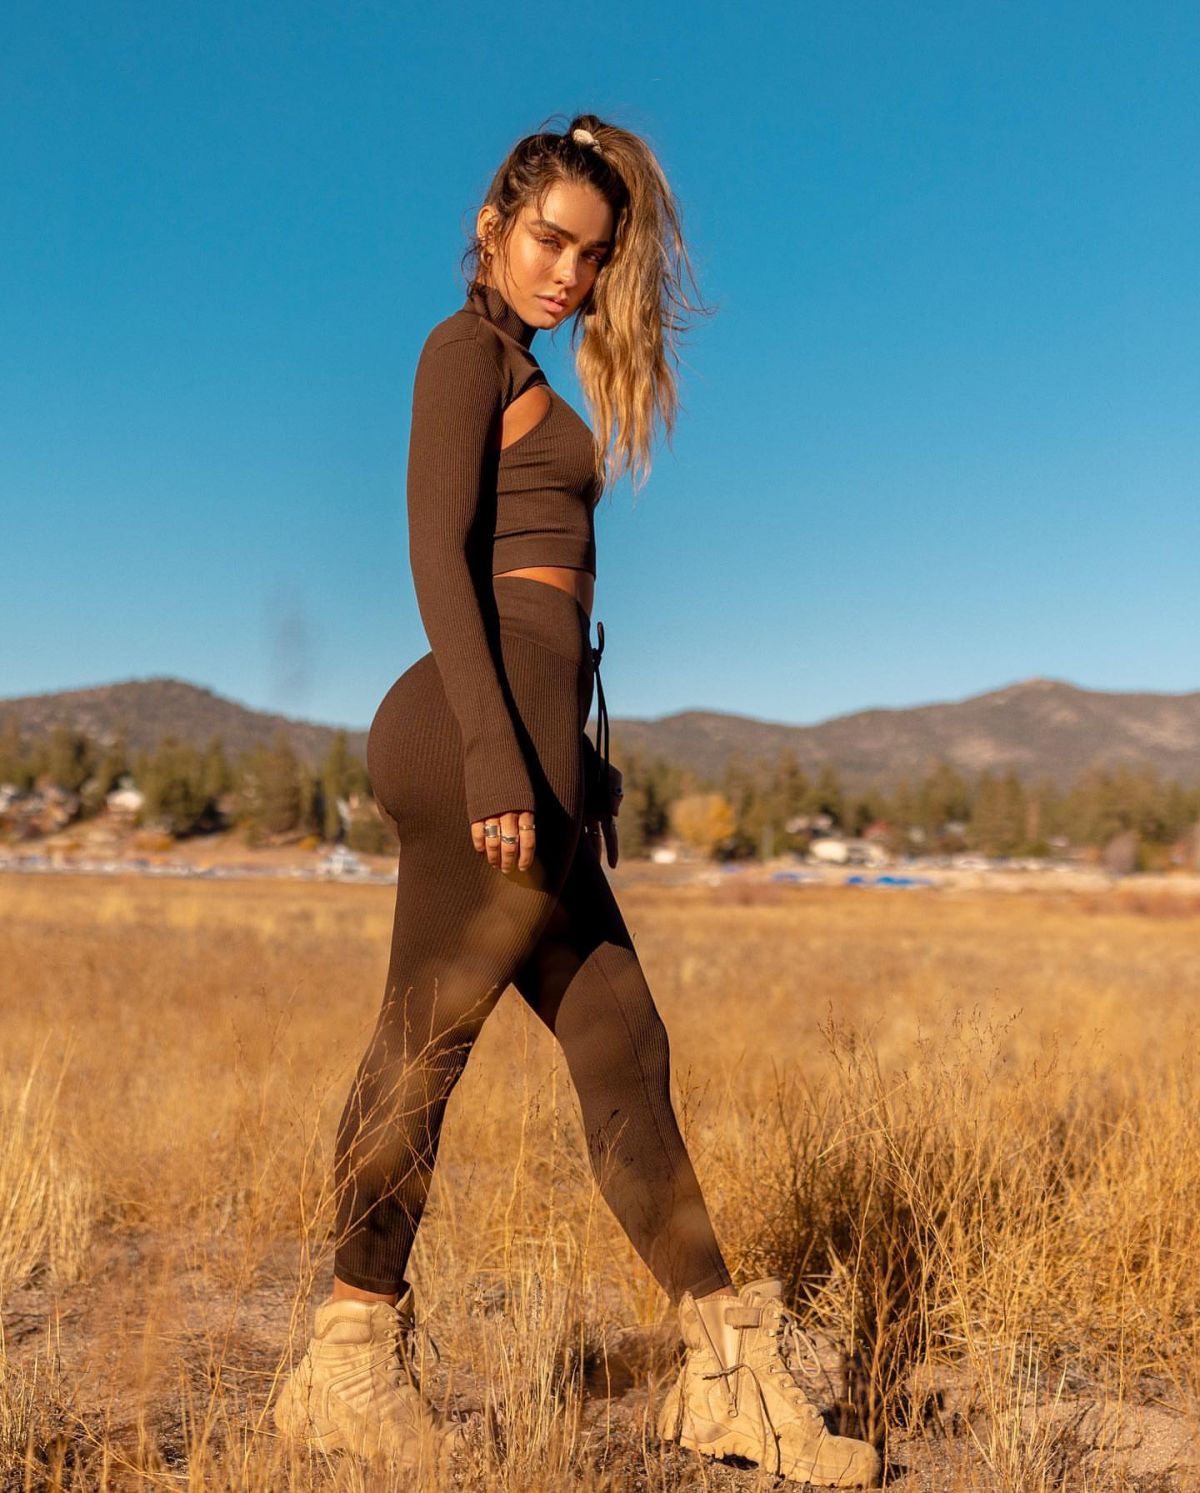 Sommer ray images - 🧡 SOMMER RAY - Instagram Photos 02/22/2022 - HawtCeleb...